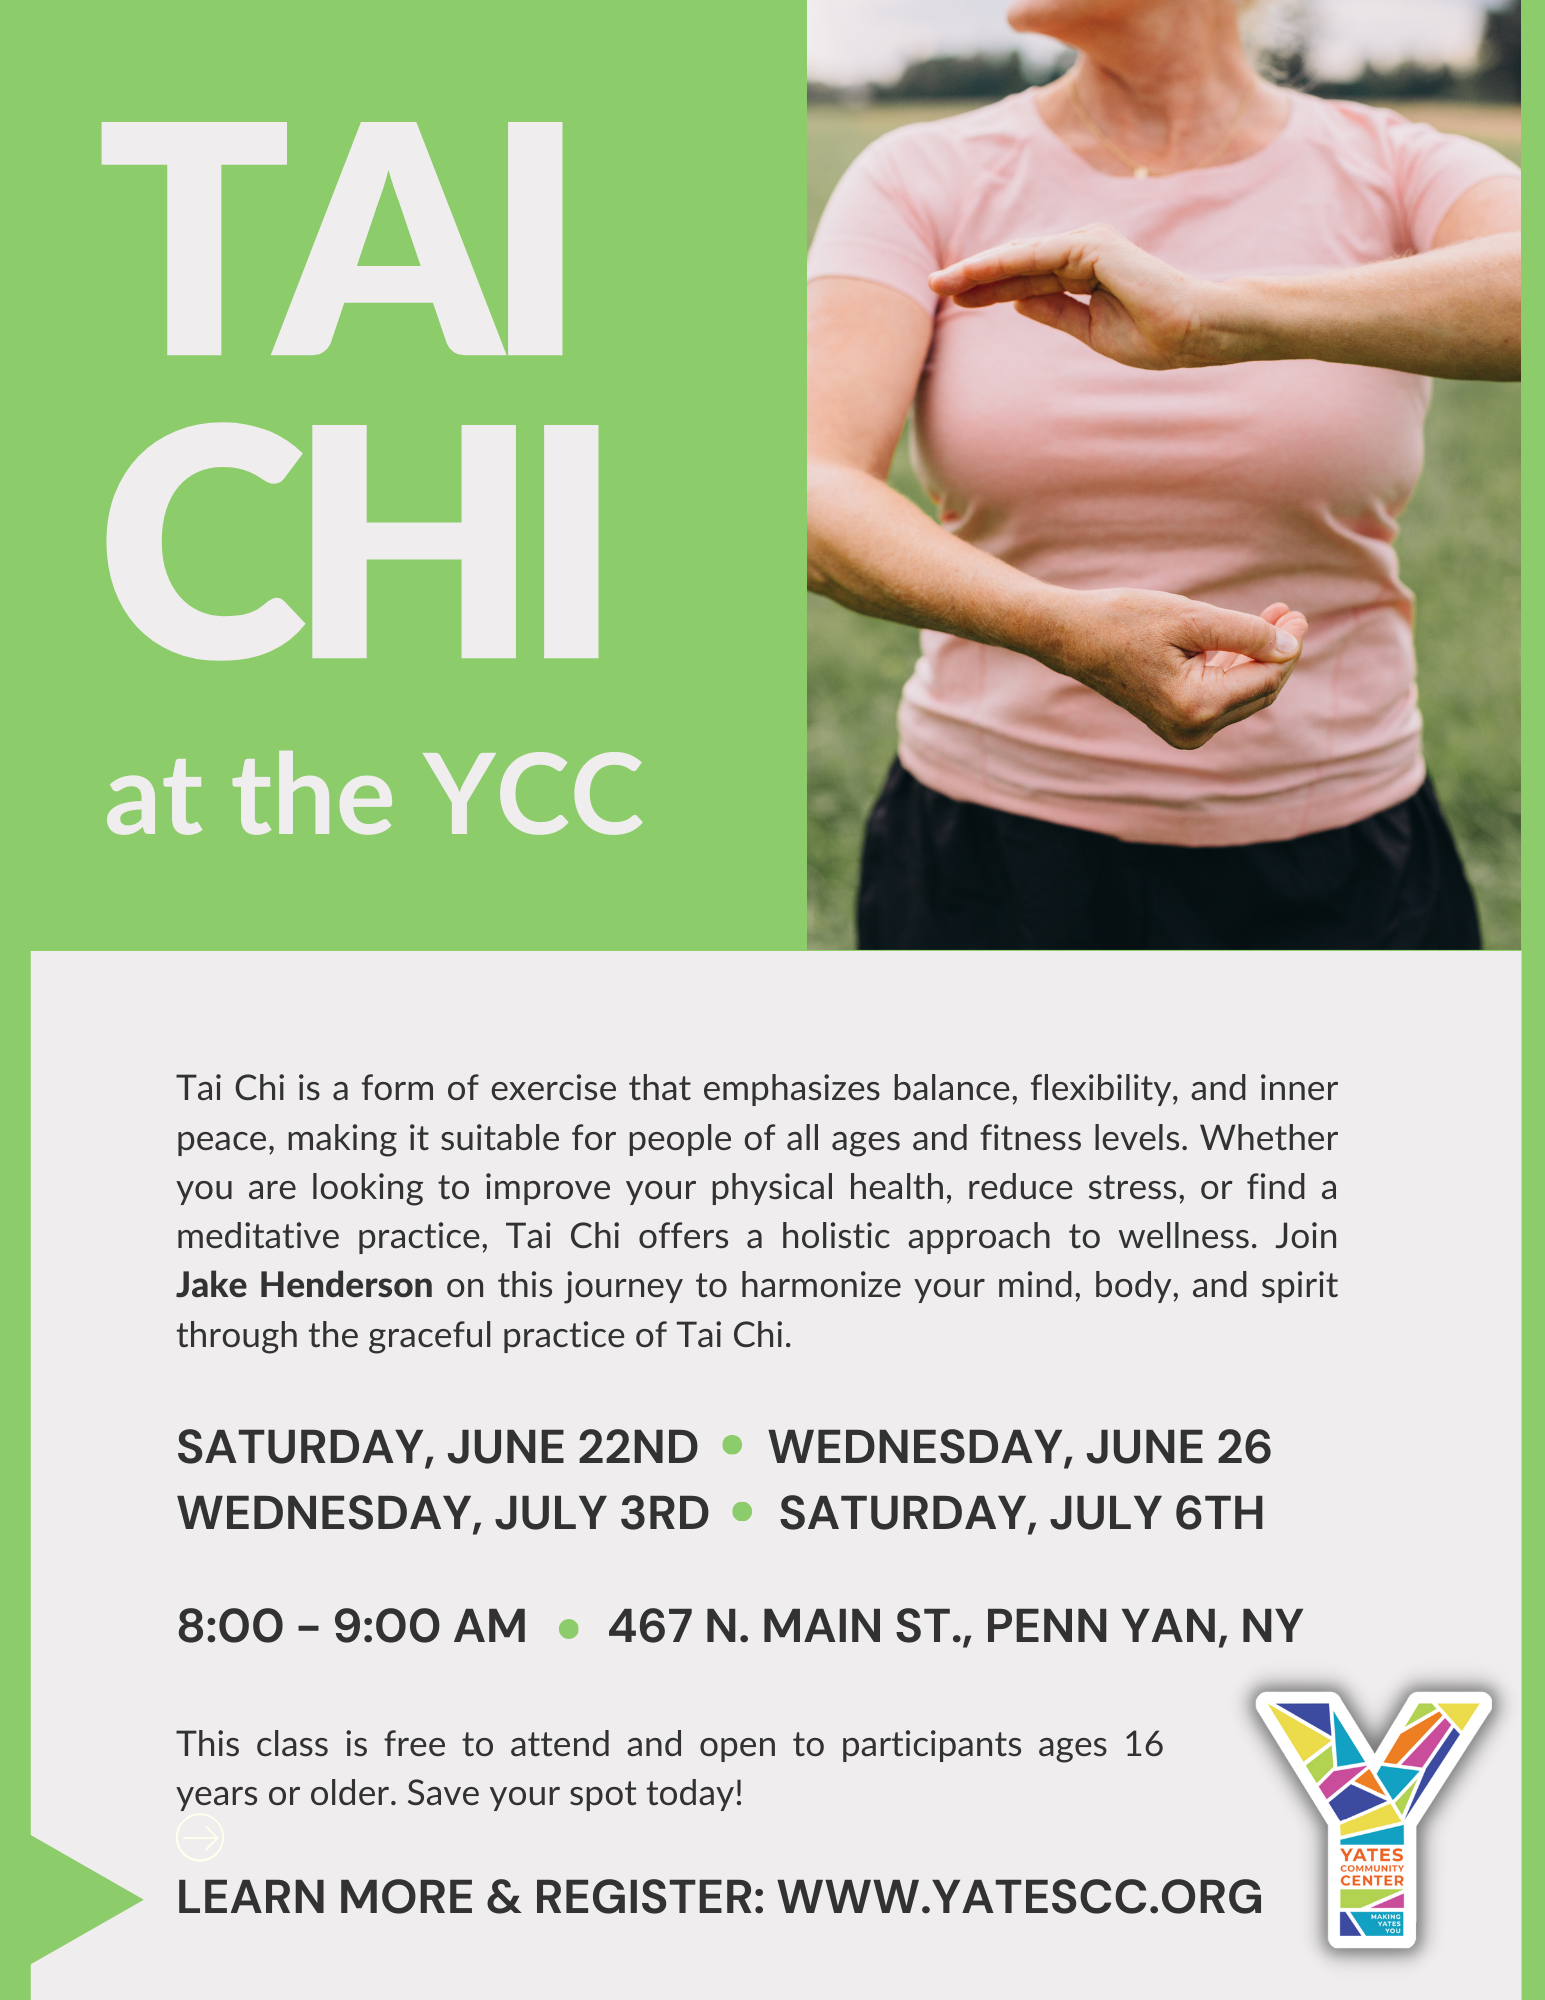 Tai Chi with Jake Henderson at the Yates Community Center